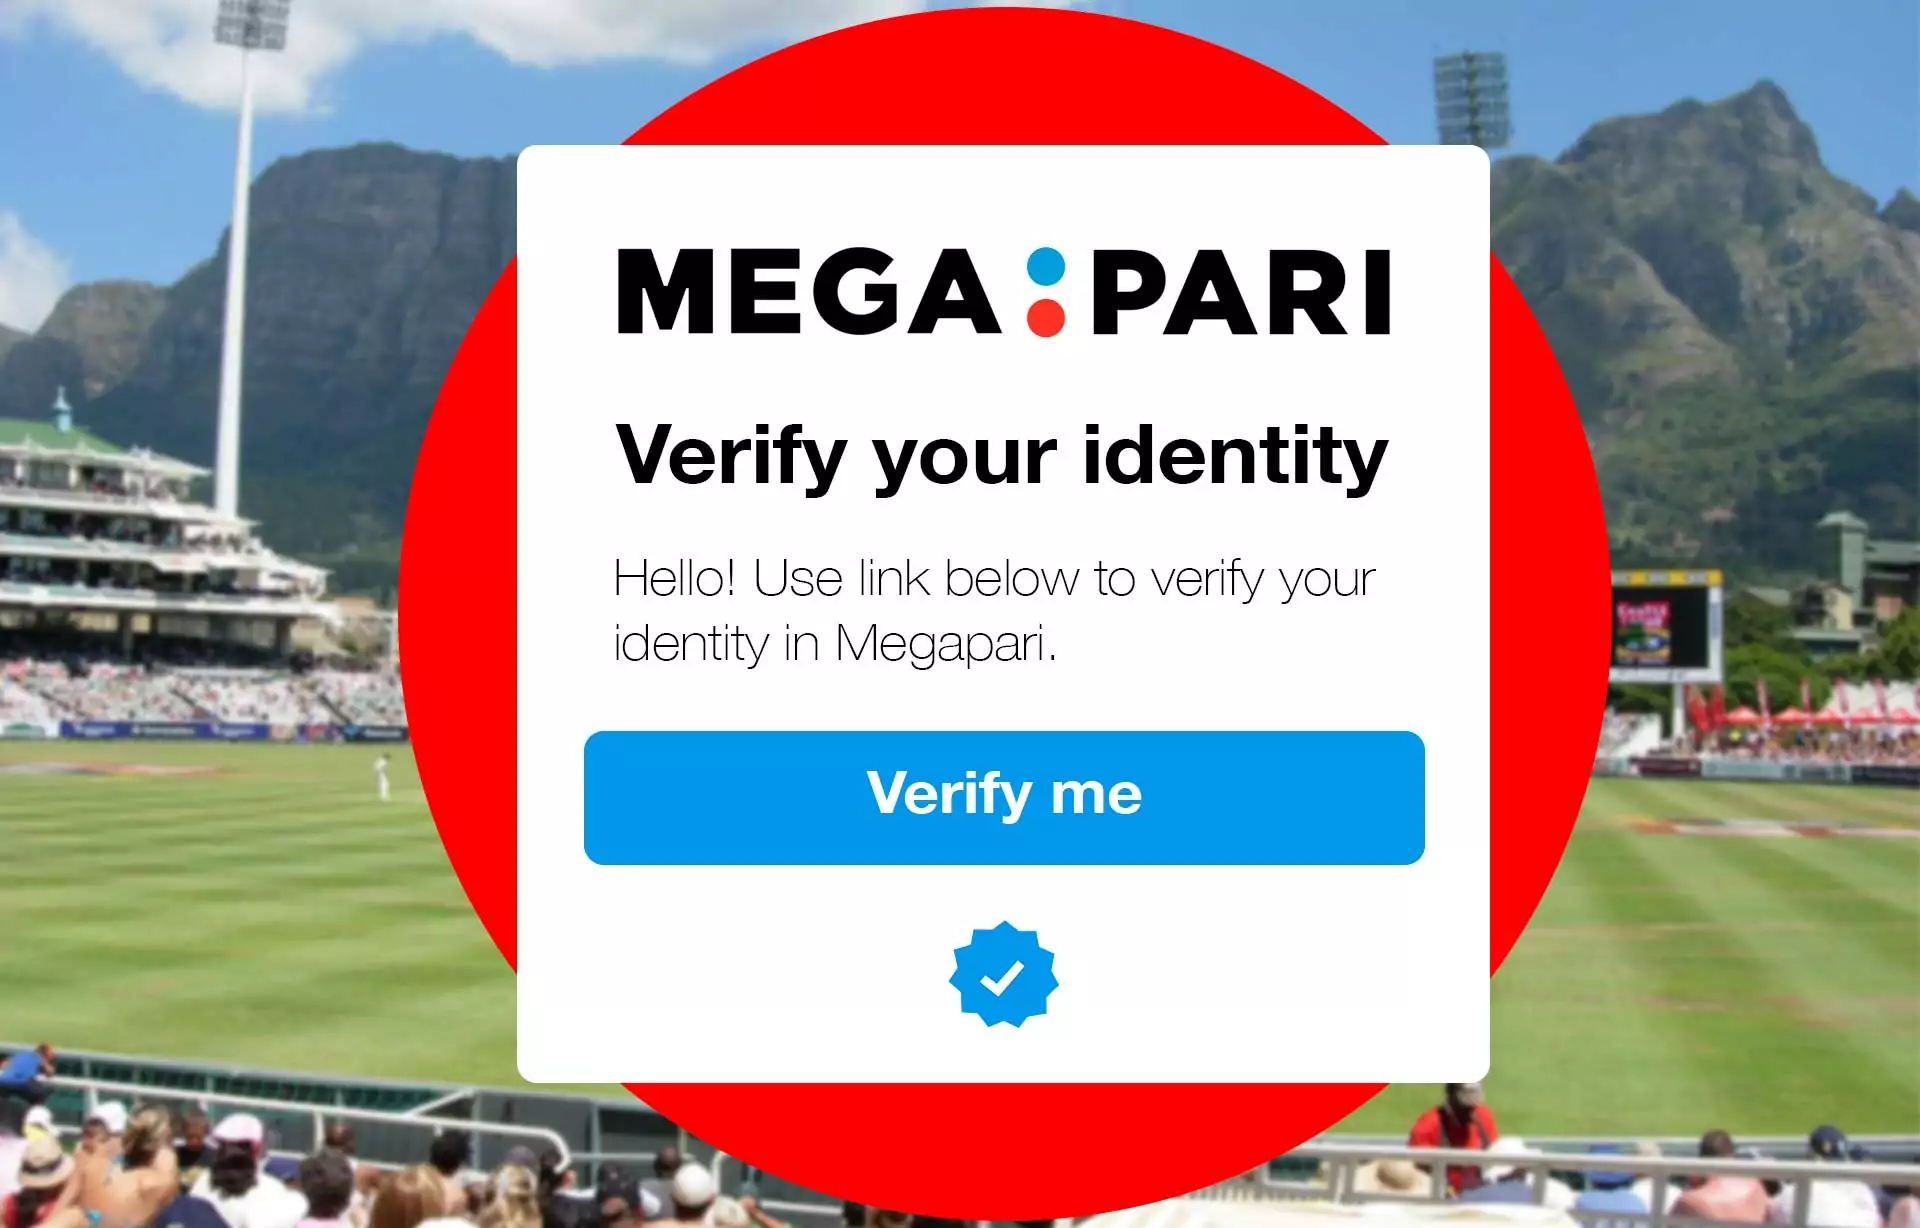 Megapari conducts a current and initial identity check for each player.